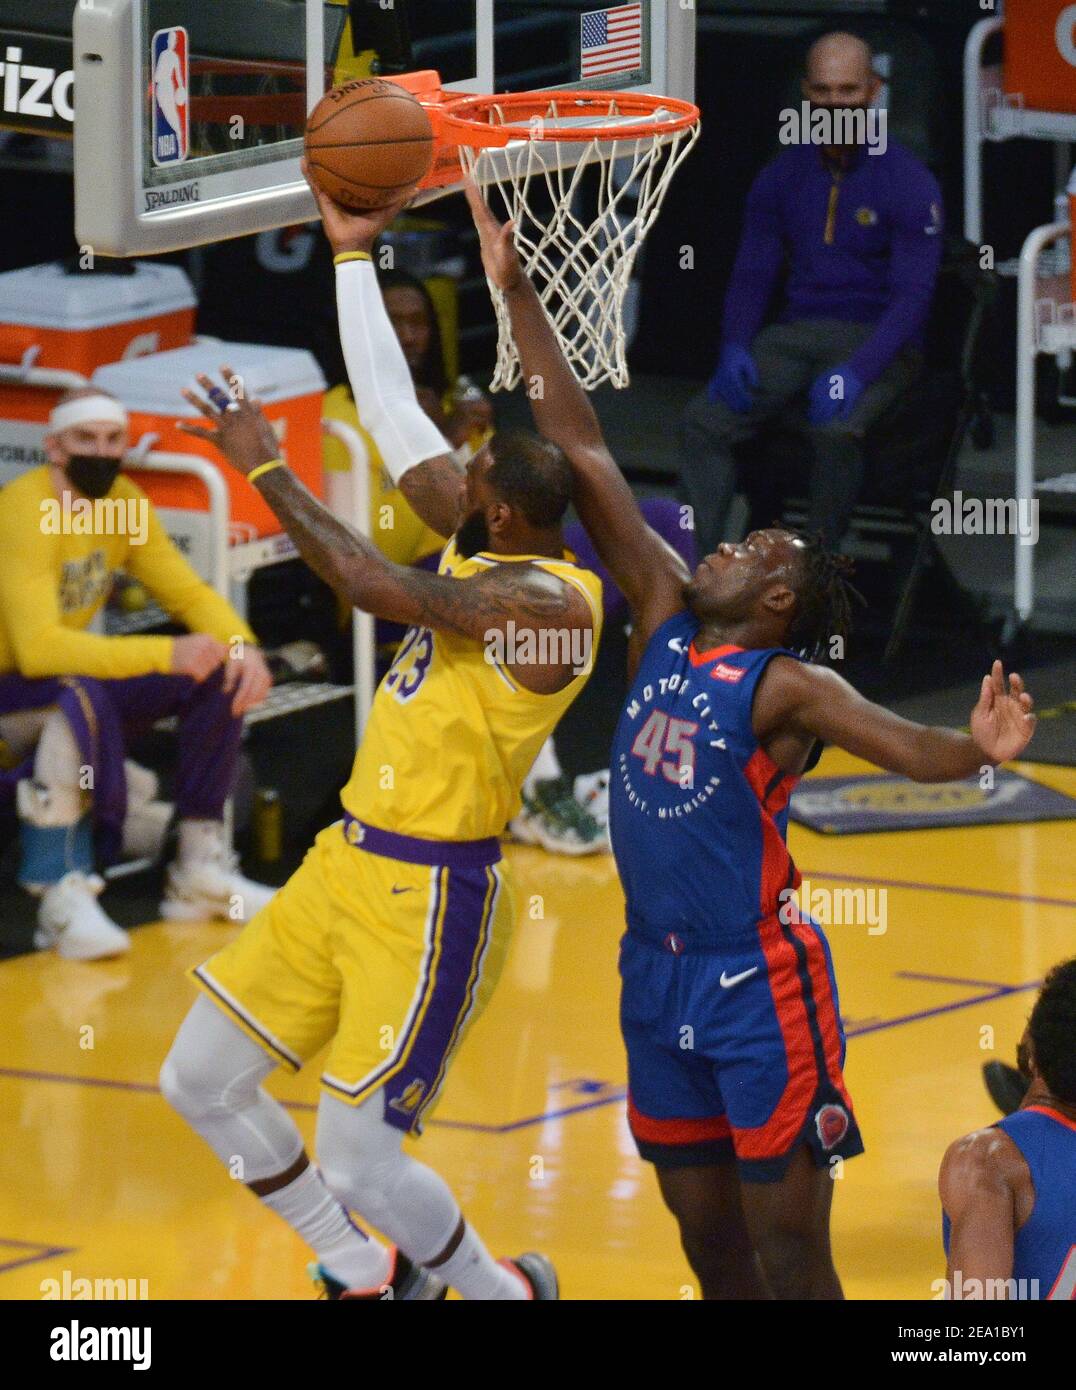 Los Angeles, United States. 06th Feb, 2021. Los Angeles Lakers' forward LeBron James scores on Detroit Pistons' forward Sekou Doumbouya during the second quarter at Staples Center in Los Angeles on Saturday, February 6, 2021. The Lakers defeated the Pistons 135-129 in double-overtime. Photo by Jim Ruymen/UPI Credit: UPI/Alamy Live News Stock Photo